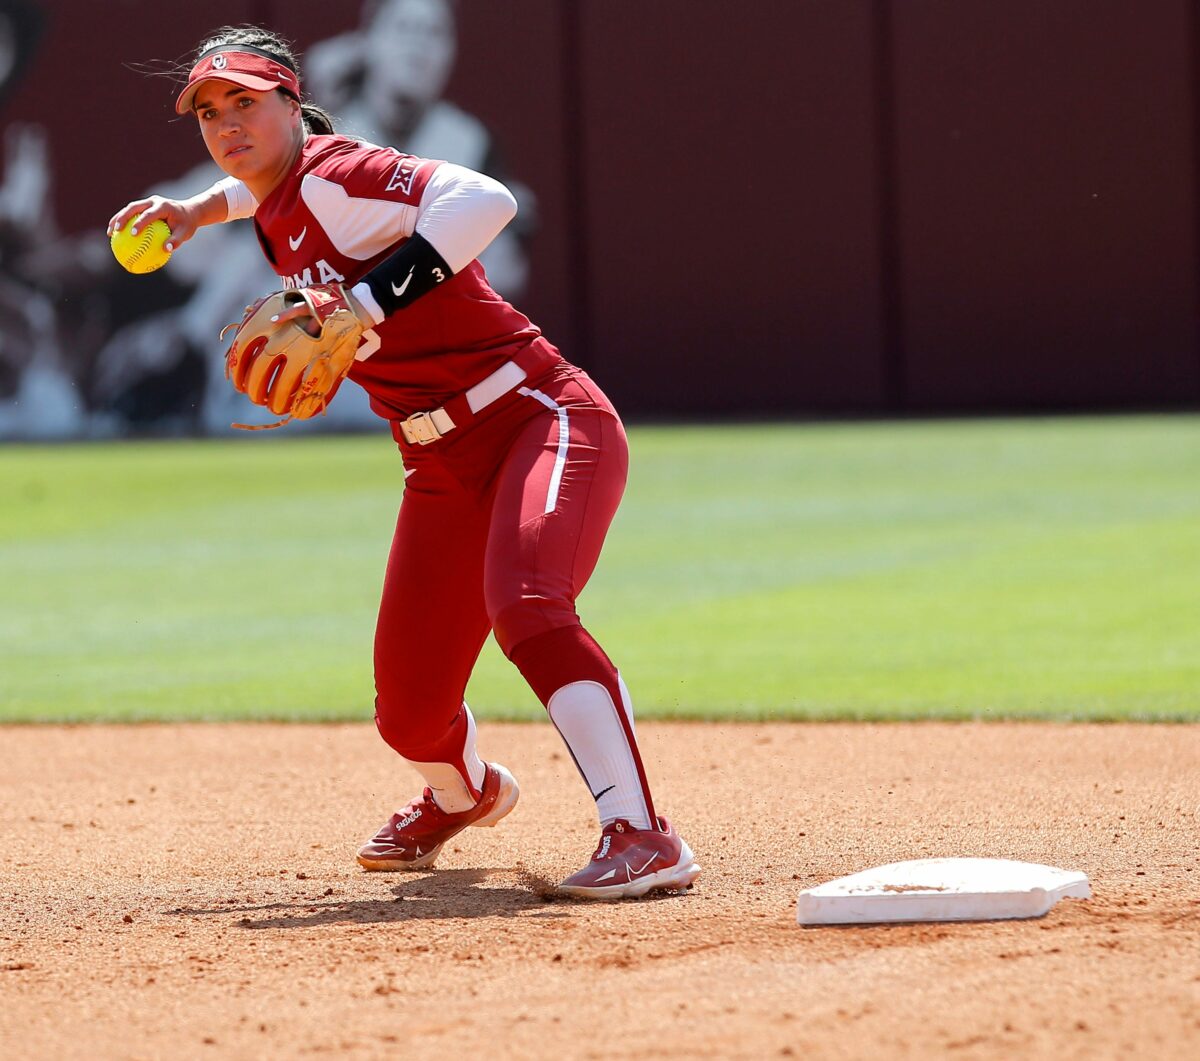 Grace Lyons wins Gold Glove Award and 5 Sooners named NFCA All-Americans